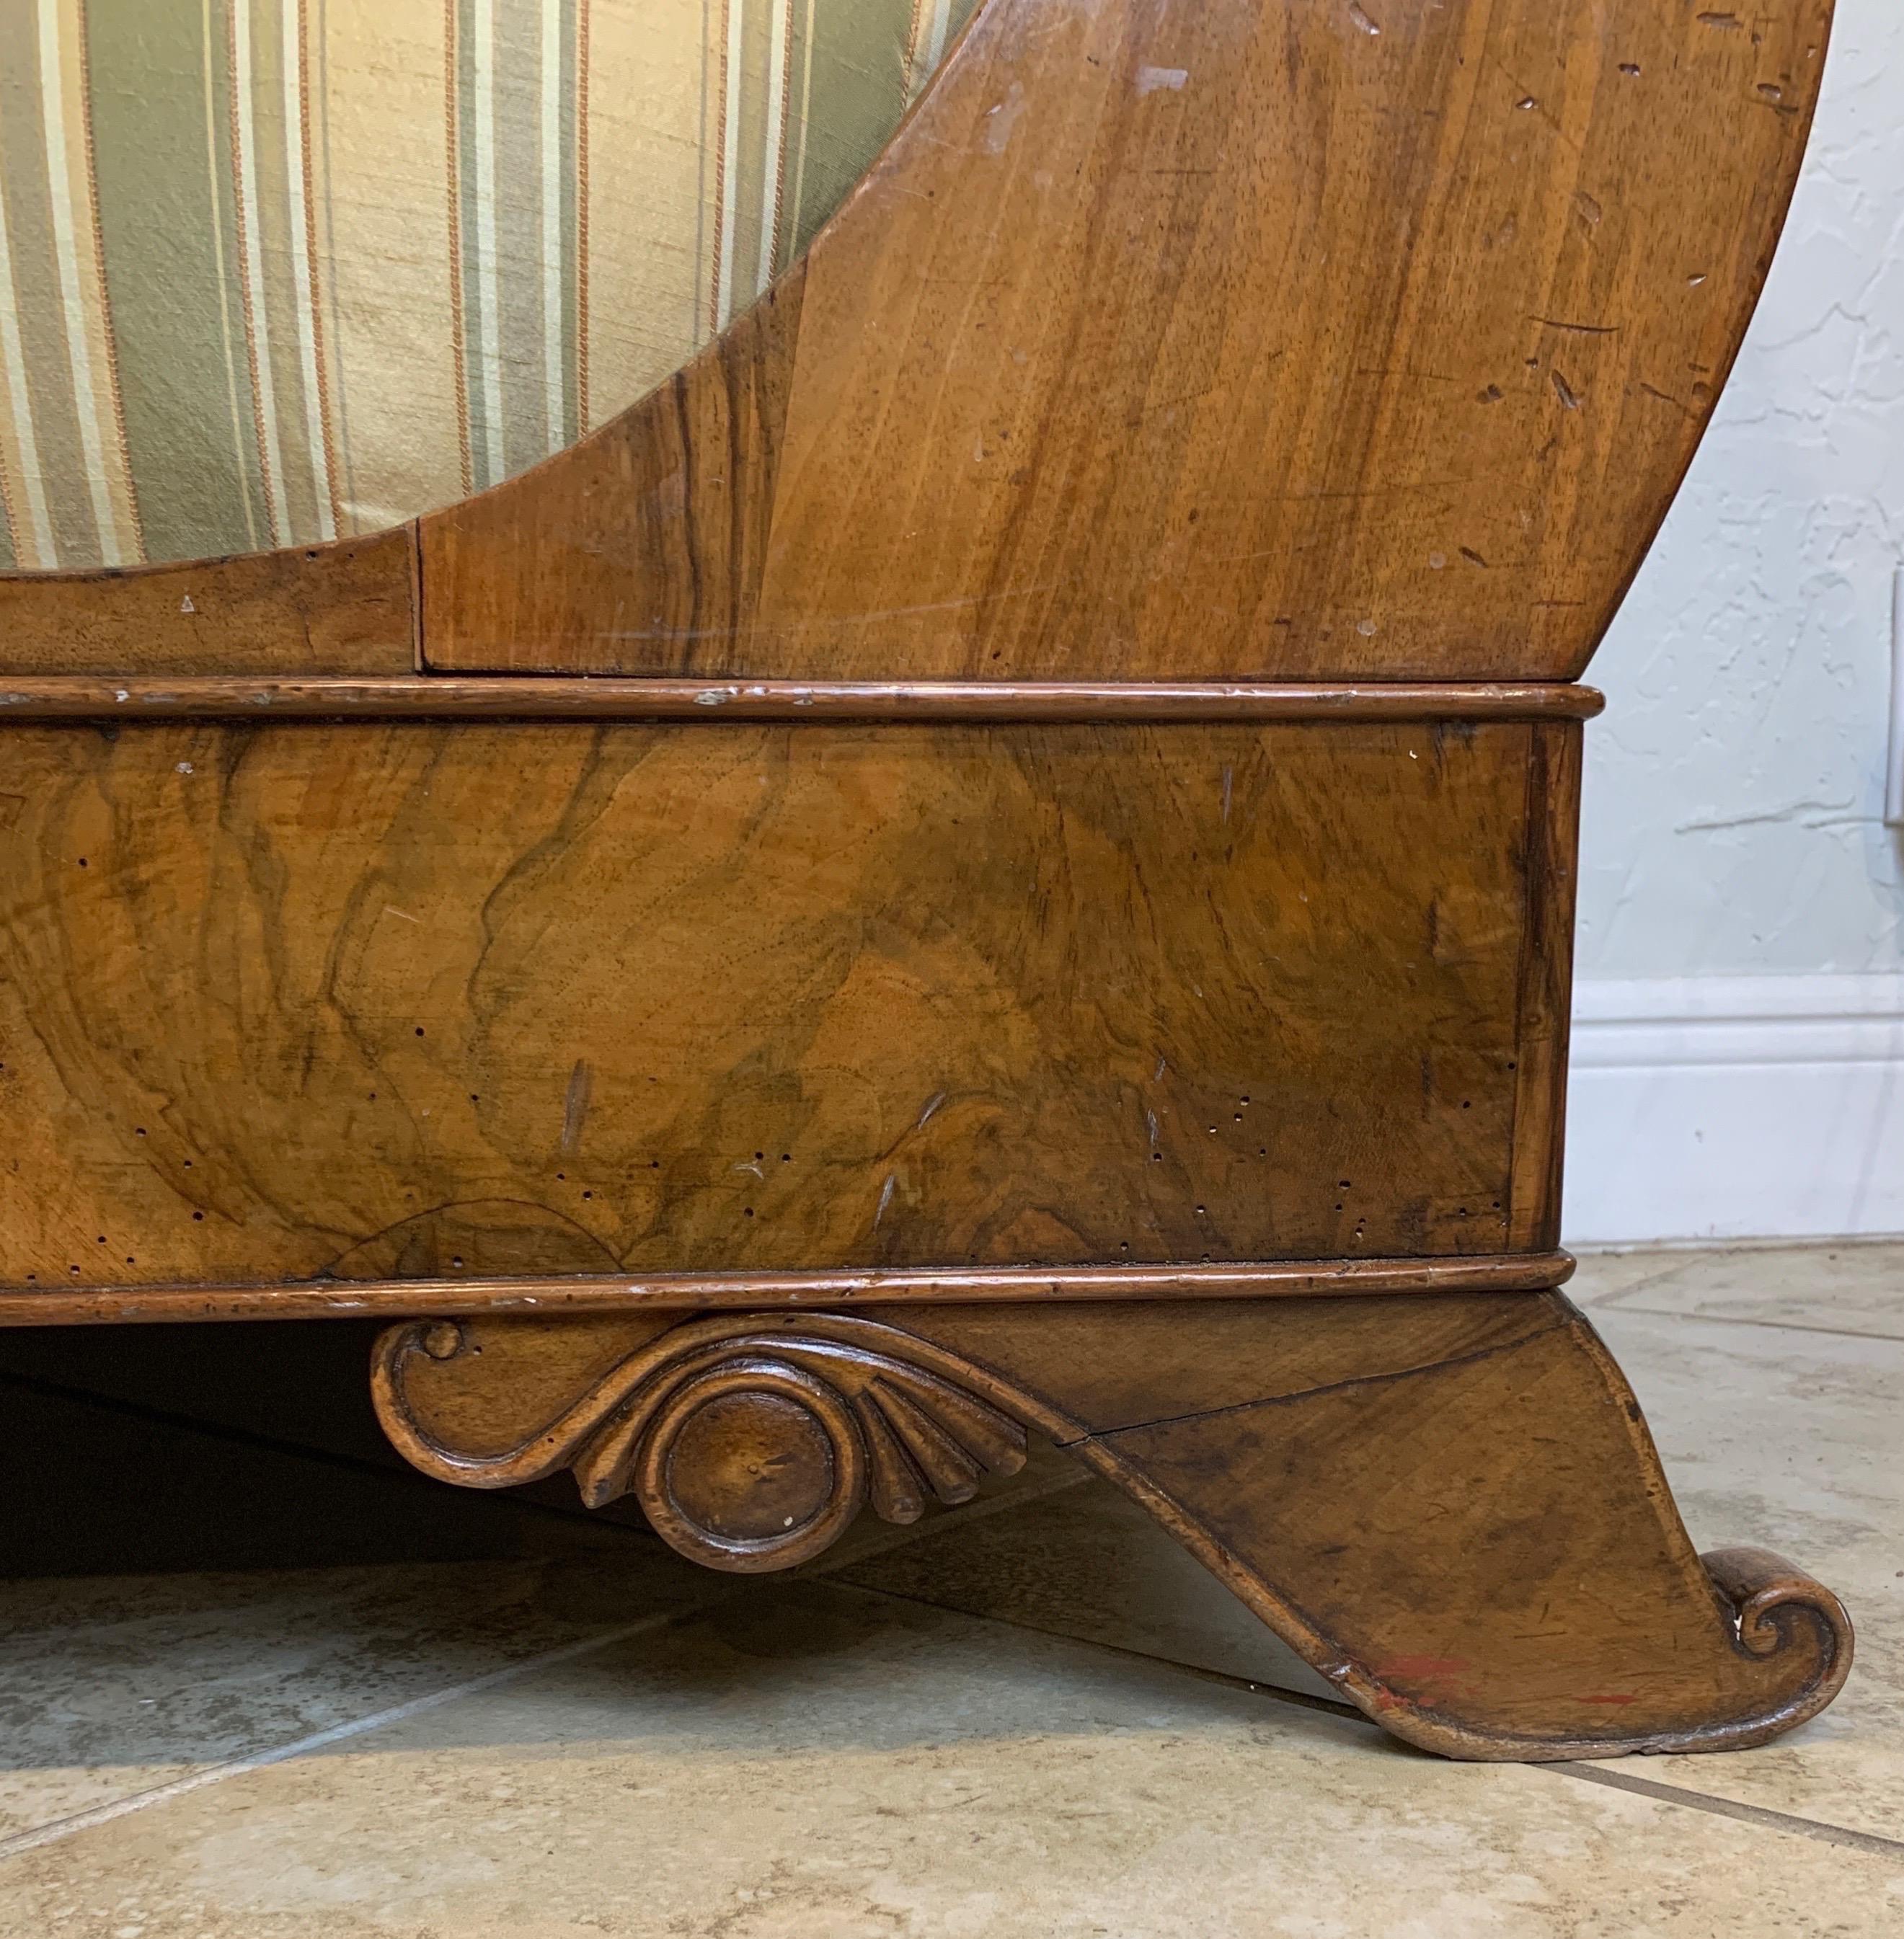 Biedermeier sofa made of walnut. Terminating in carved scroll feet. Each side with a rolled arm. Structurally sound.